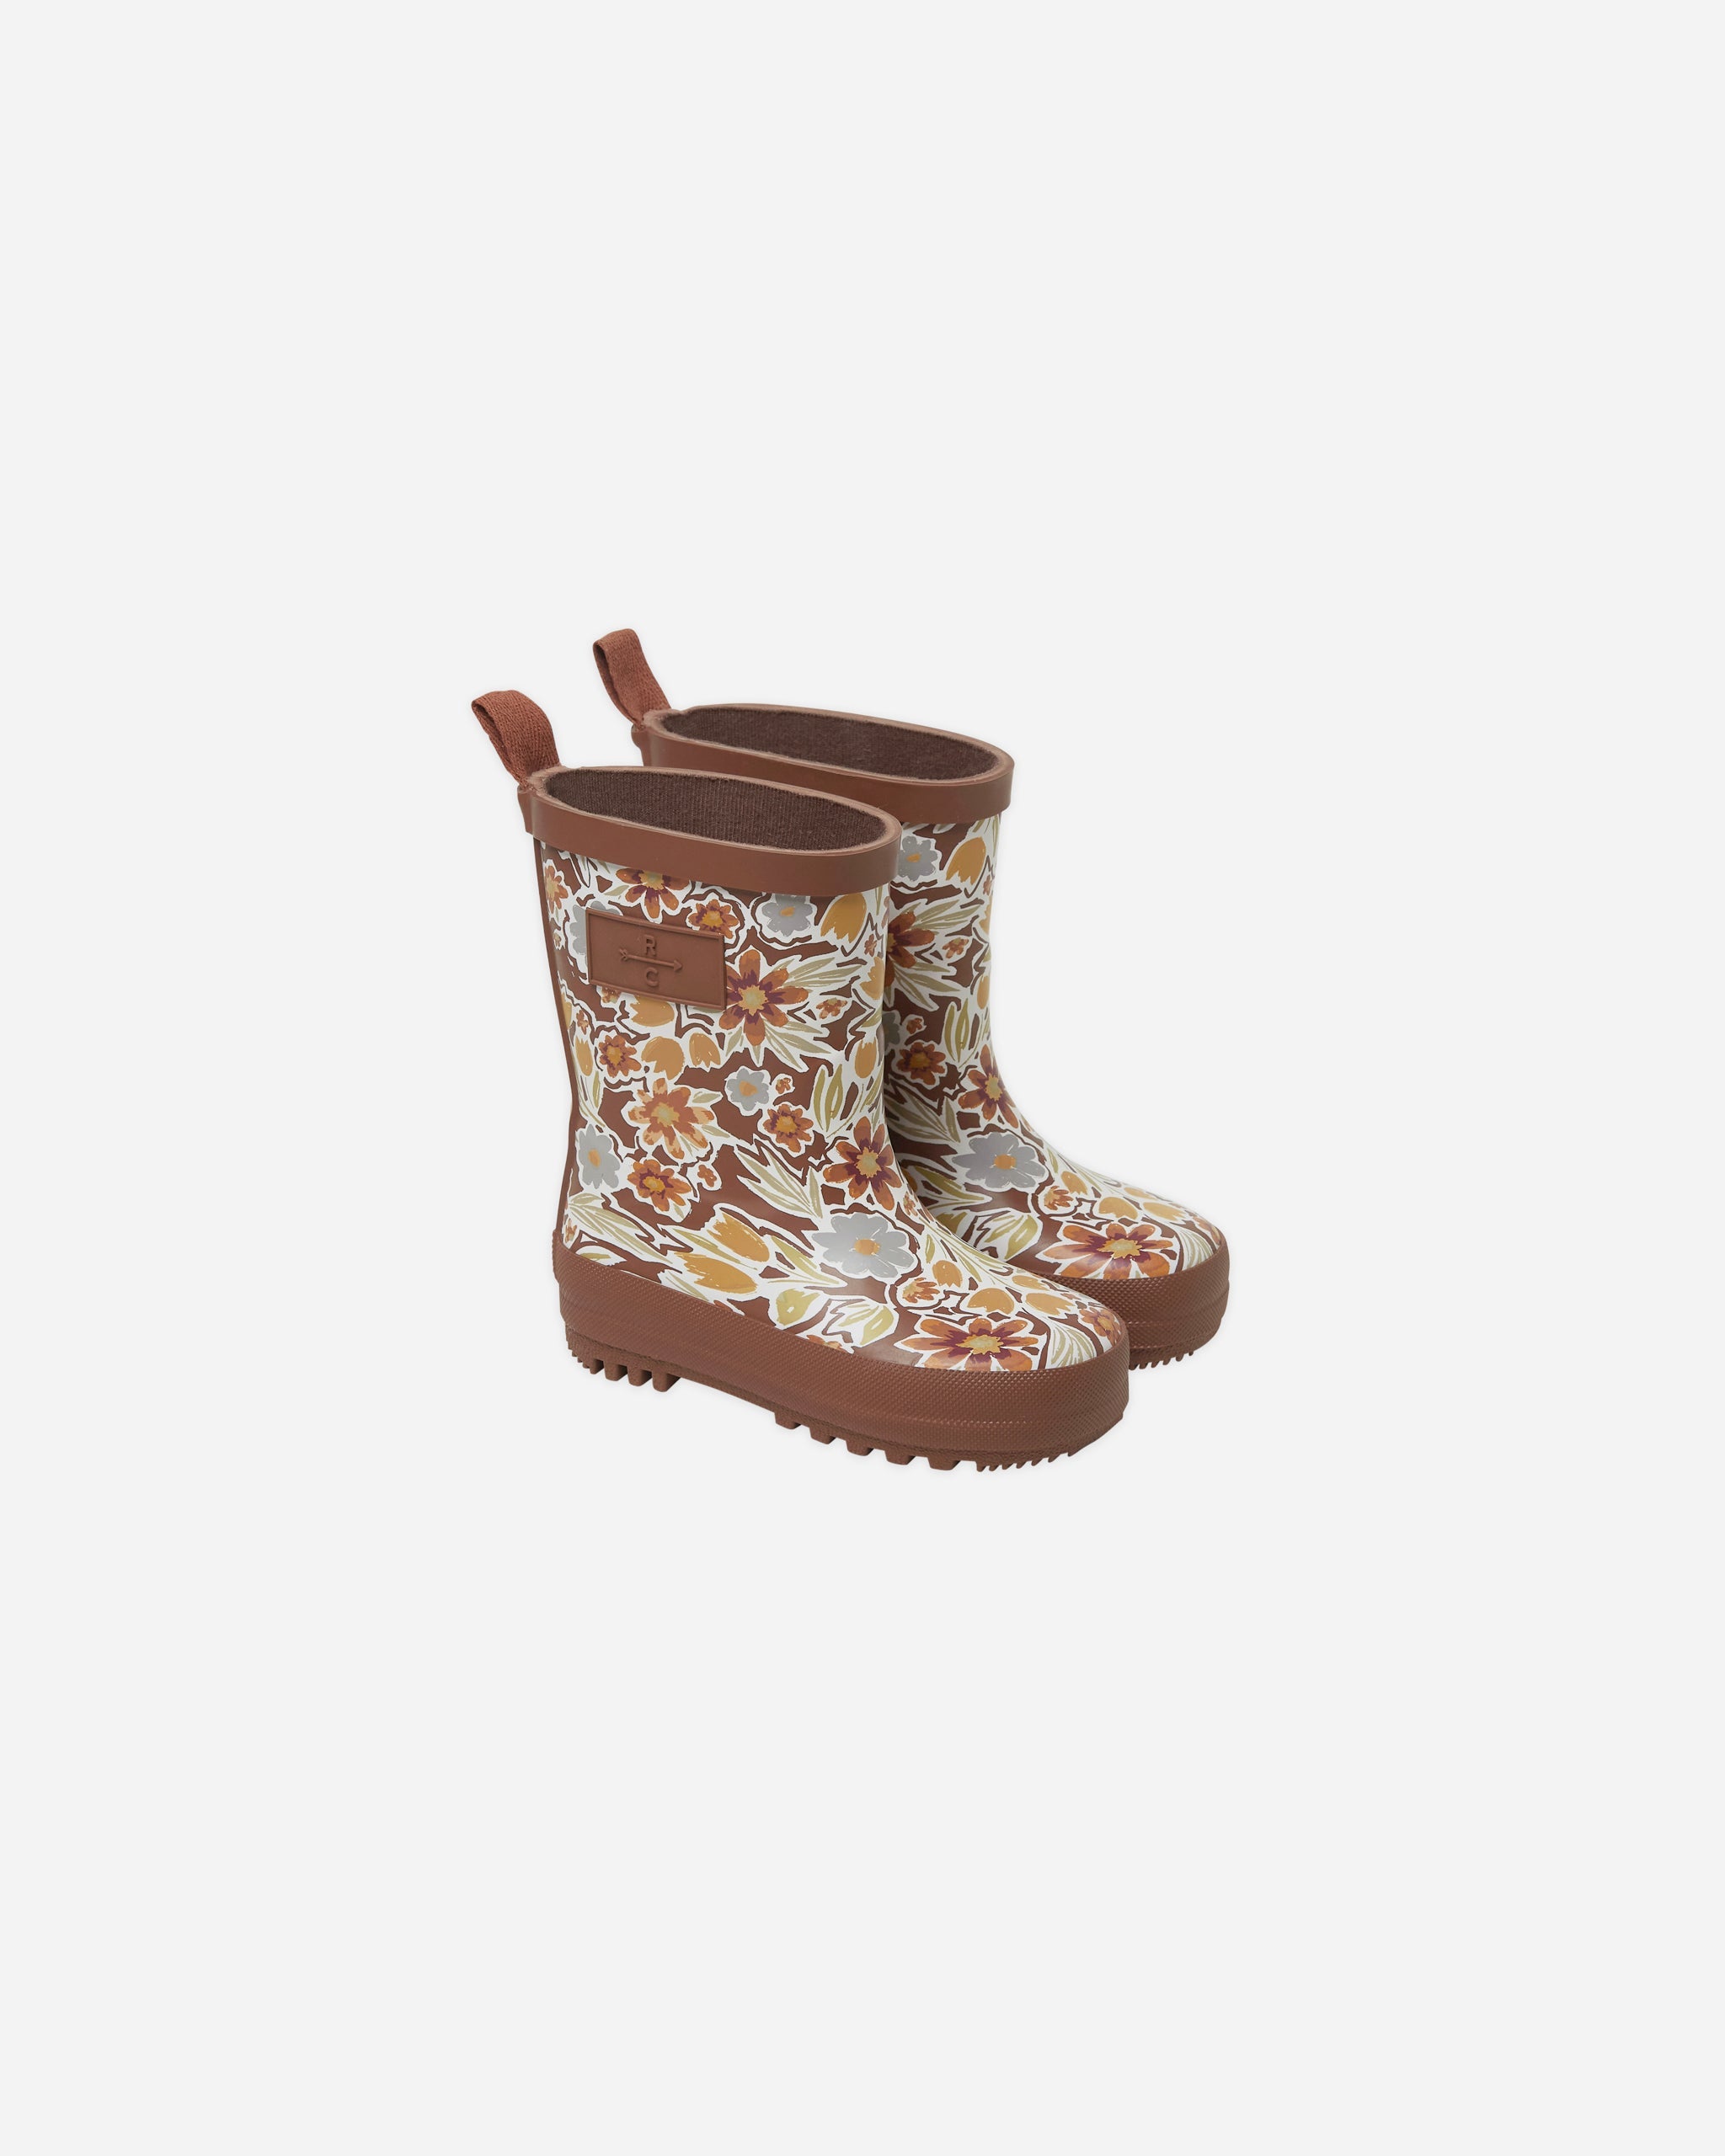 Rainboot || Autumn Bloom - Rylee + Cru | Kids Clothes | Trendy Baby Clothes | Modern Infant Outfits |